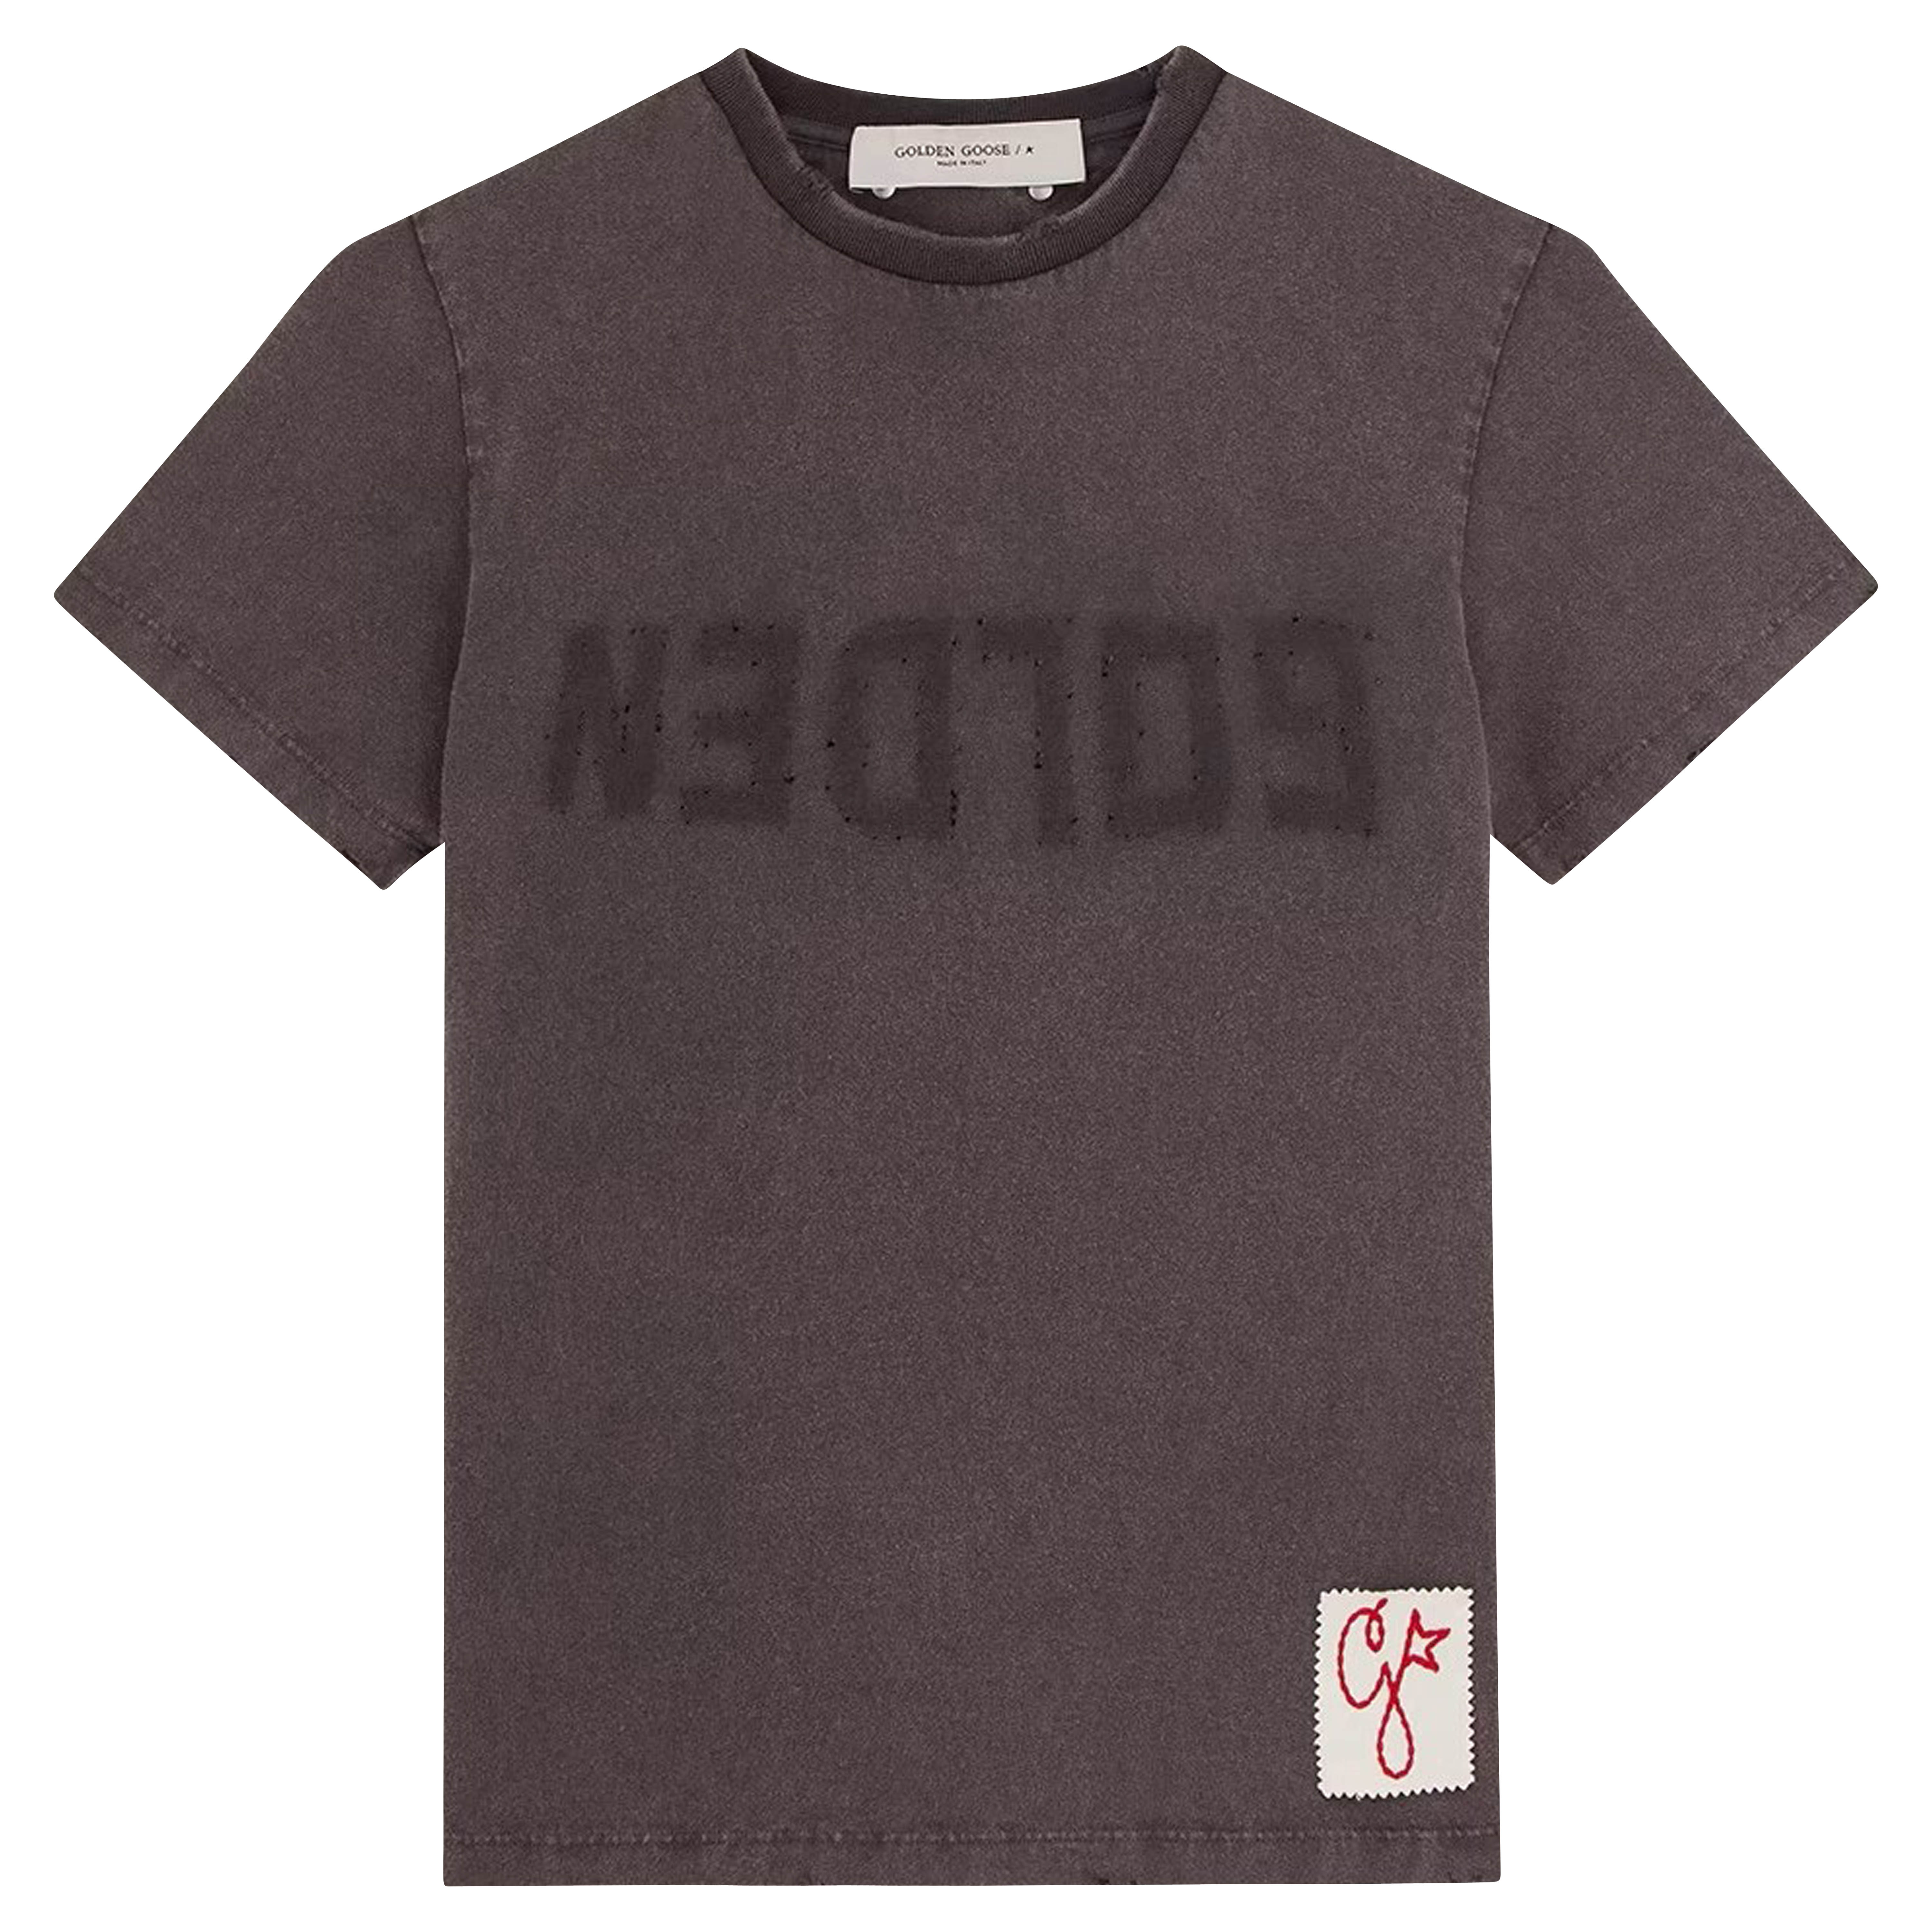 Golden Goose Distressed T-Shirt in Anthracite